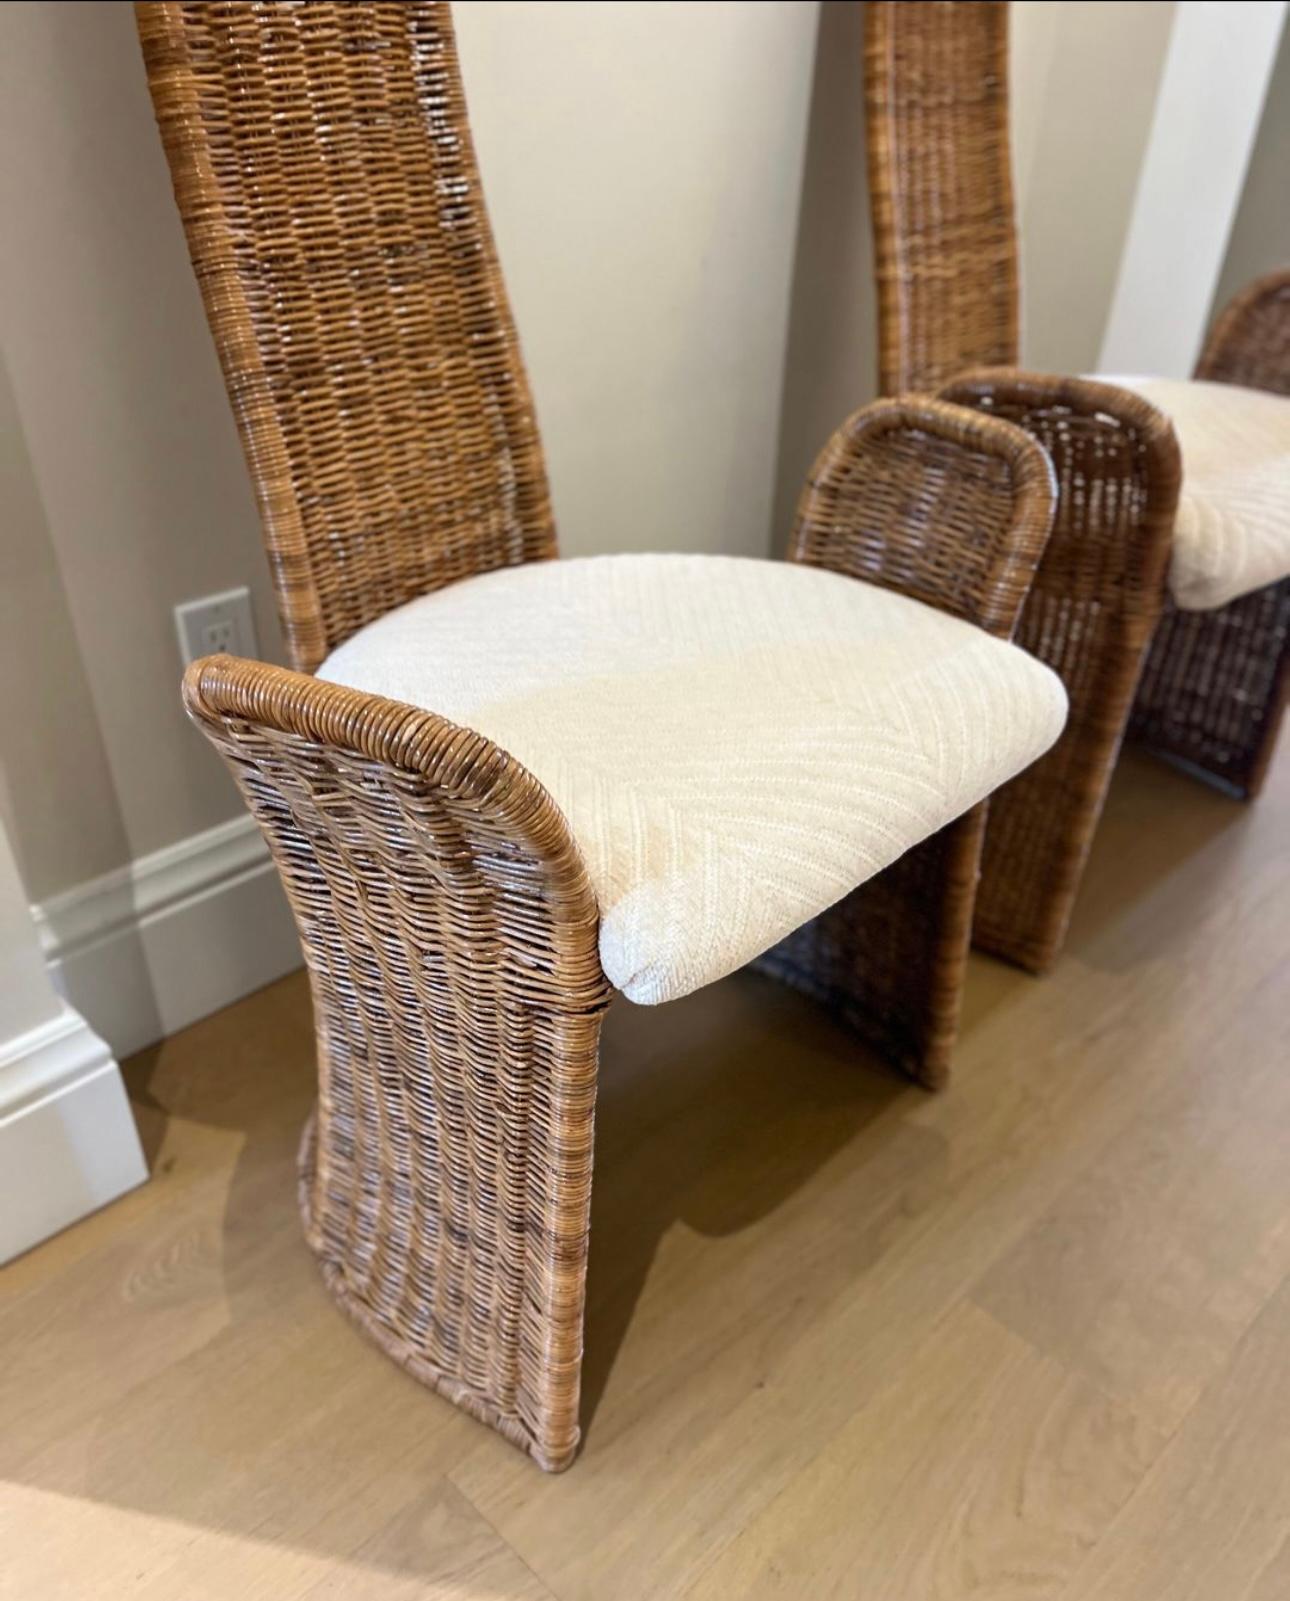 American Pair of high back wicker accent chairs designed by Danny Ho Fong for Tropic-Cal For Sale